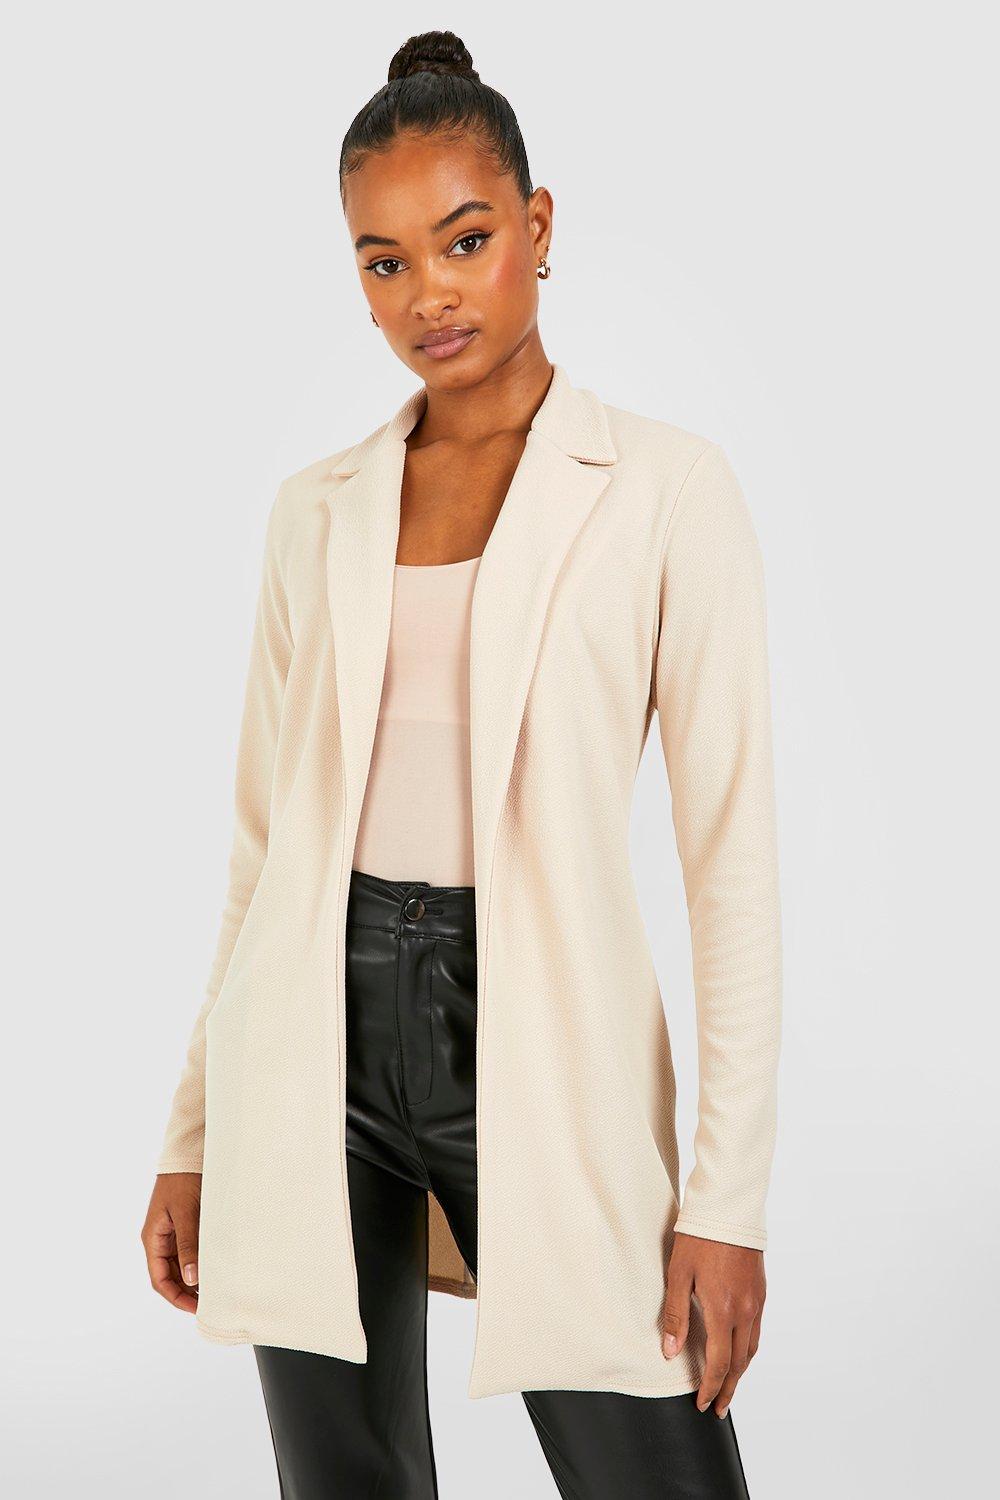 Boohoo Tall Getailleerde Basic Jersey Long Line Blazer, Taupe